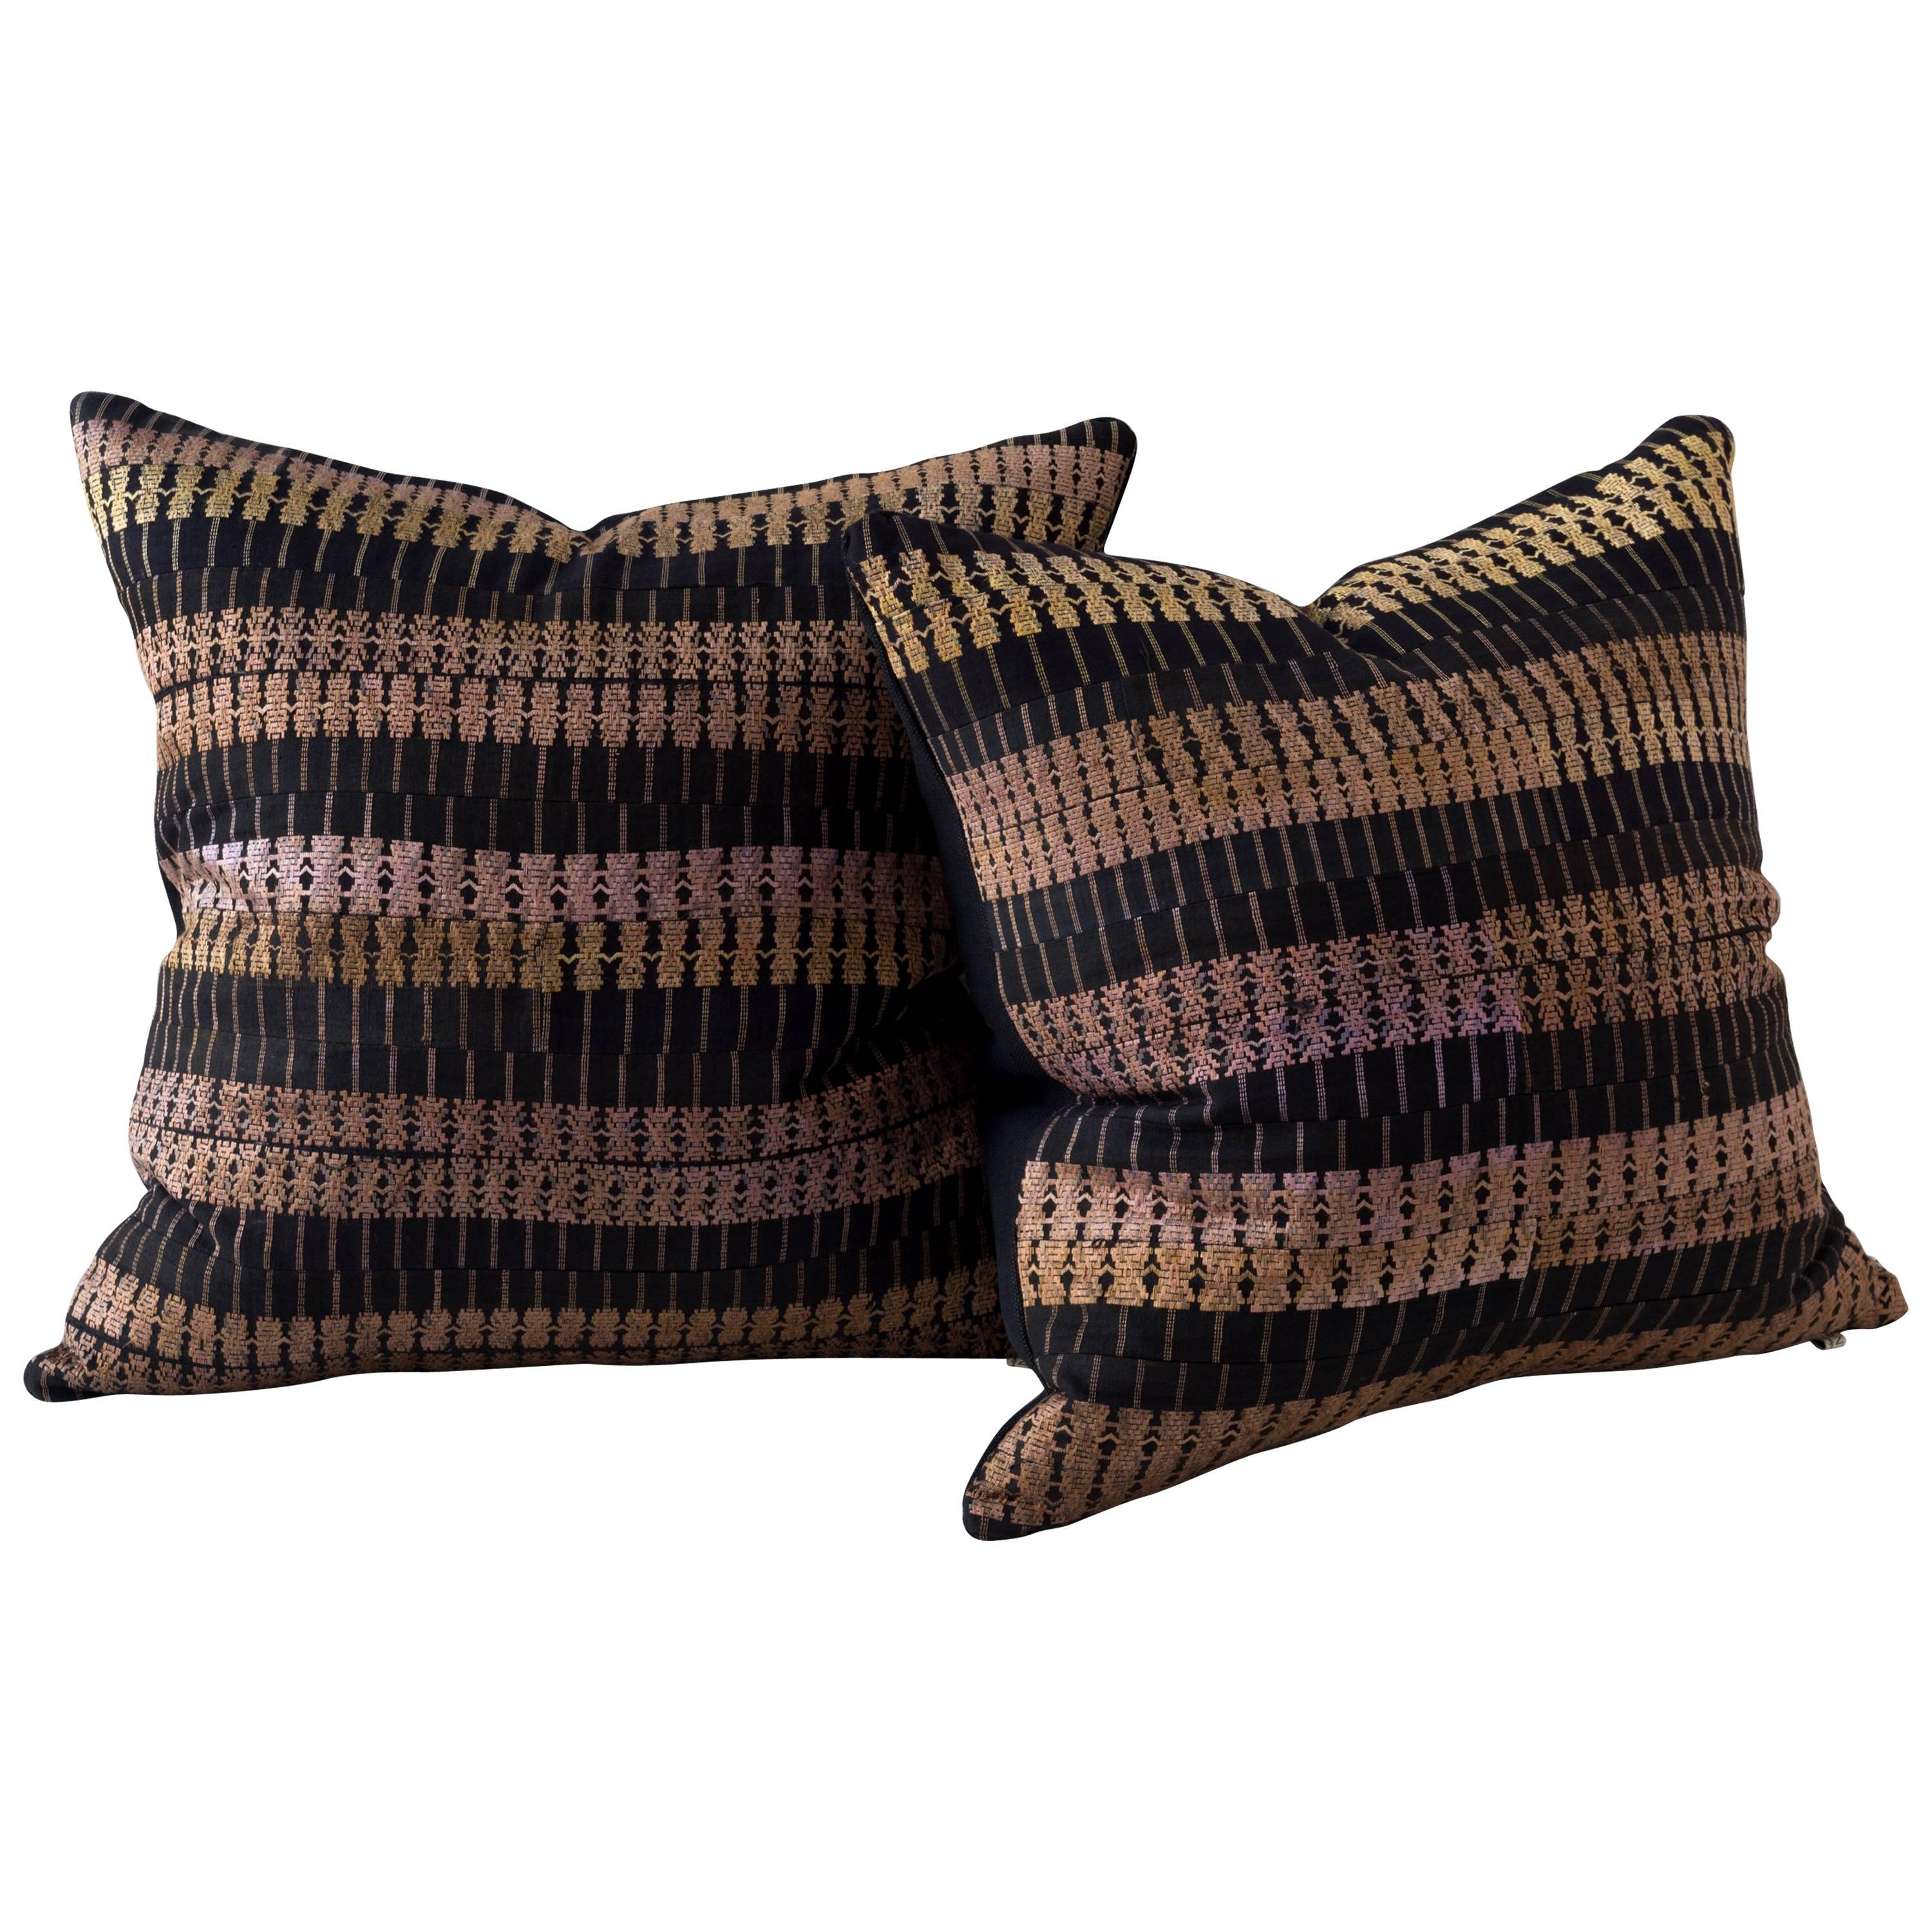 Huangping Embroidery Pillow, Stripe For Sale